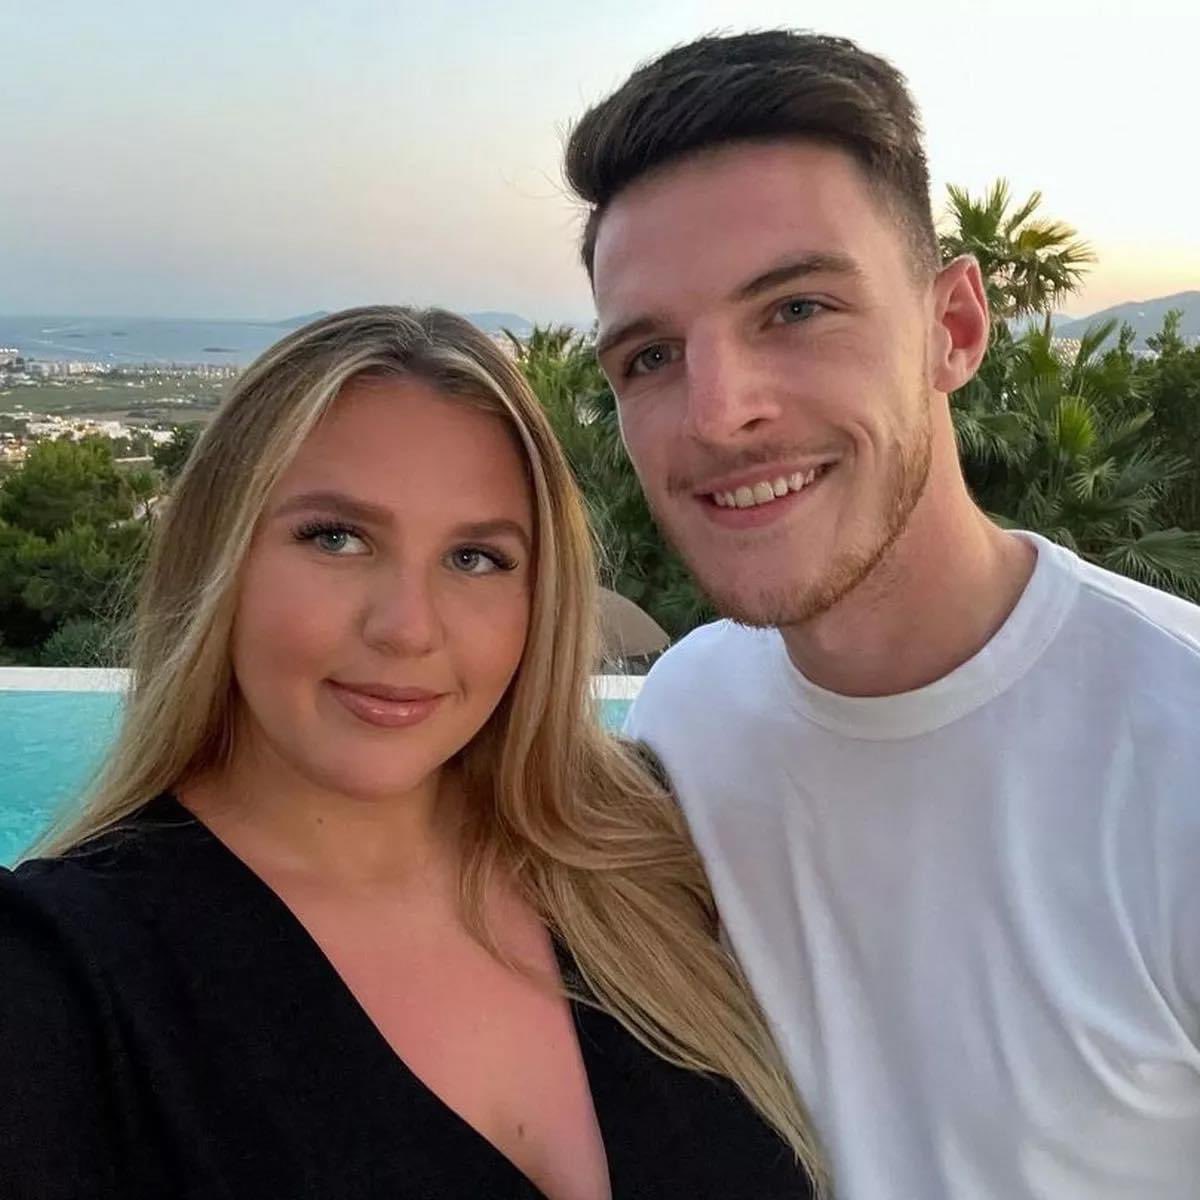 🏴󠁧󠁢󠁥󠁮󠁧󠁿 Declan Rice’s girlfriend Lauren Fryer has sadly deleted all her social media photos after vile trolls made fun over her appearance. Absolutely heartbreaking to hear, nobody deserves that. 💔